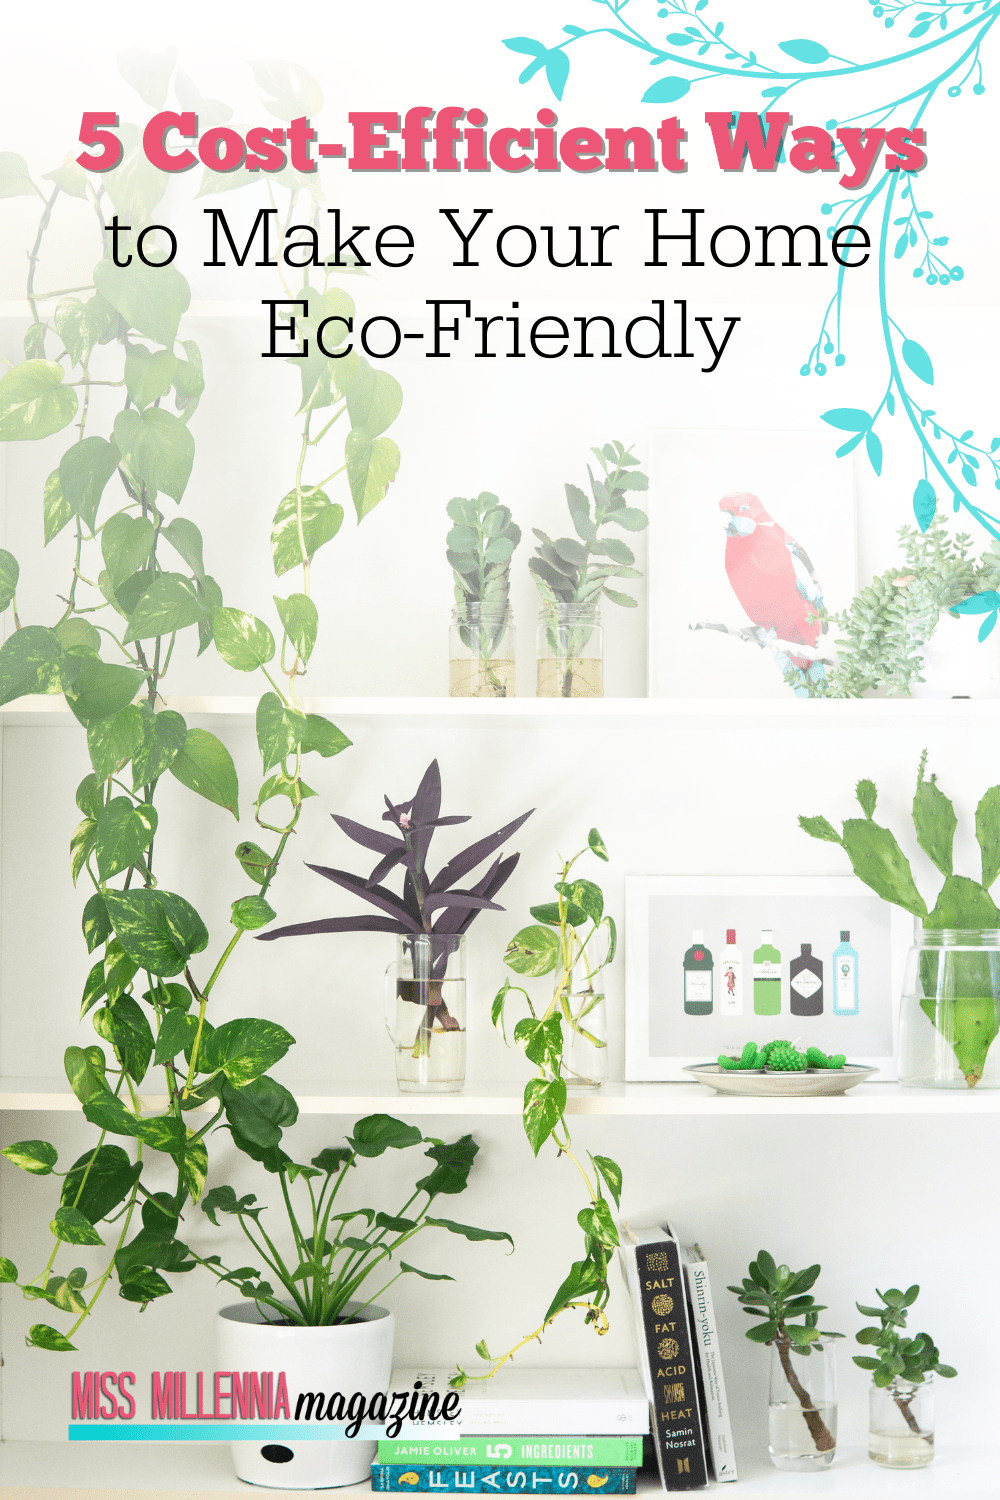 5 Cost-Efficient Ways to Make Your Home Eco-Friendly